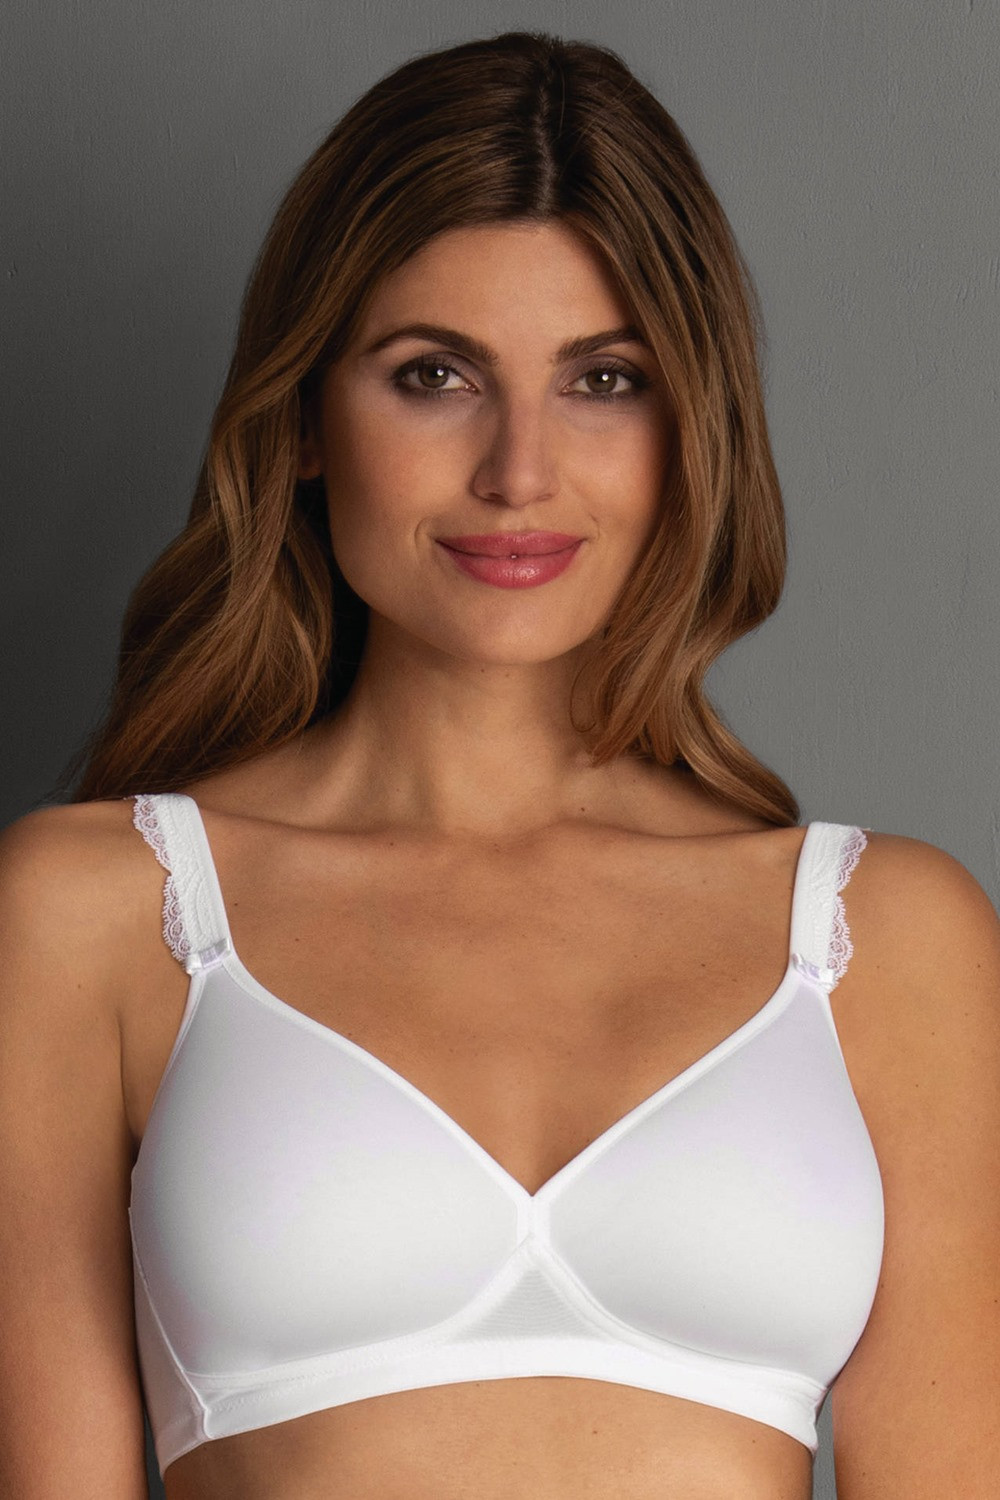 Comfort non-wired bra with cups that don't show up under tight tops